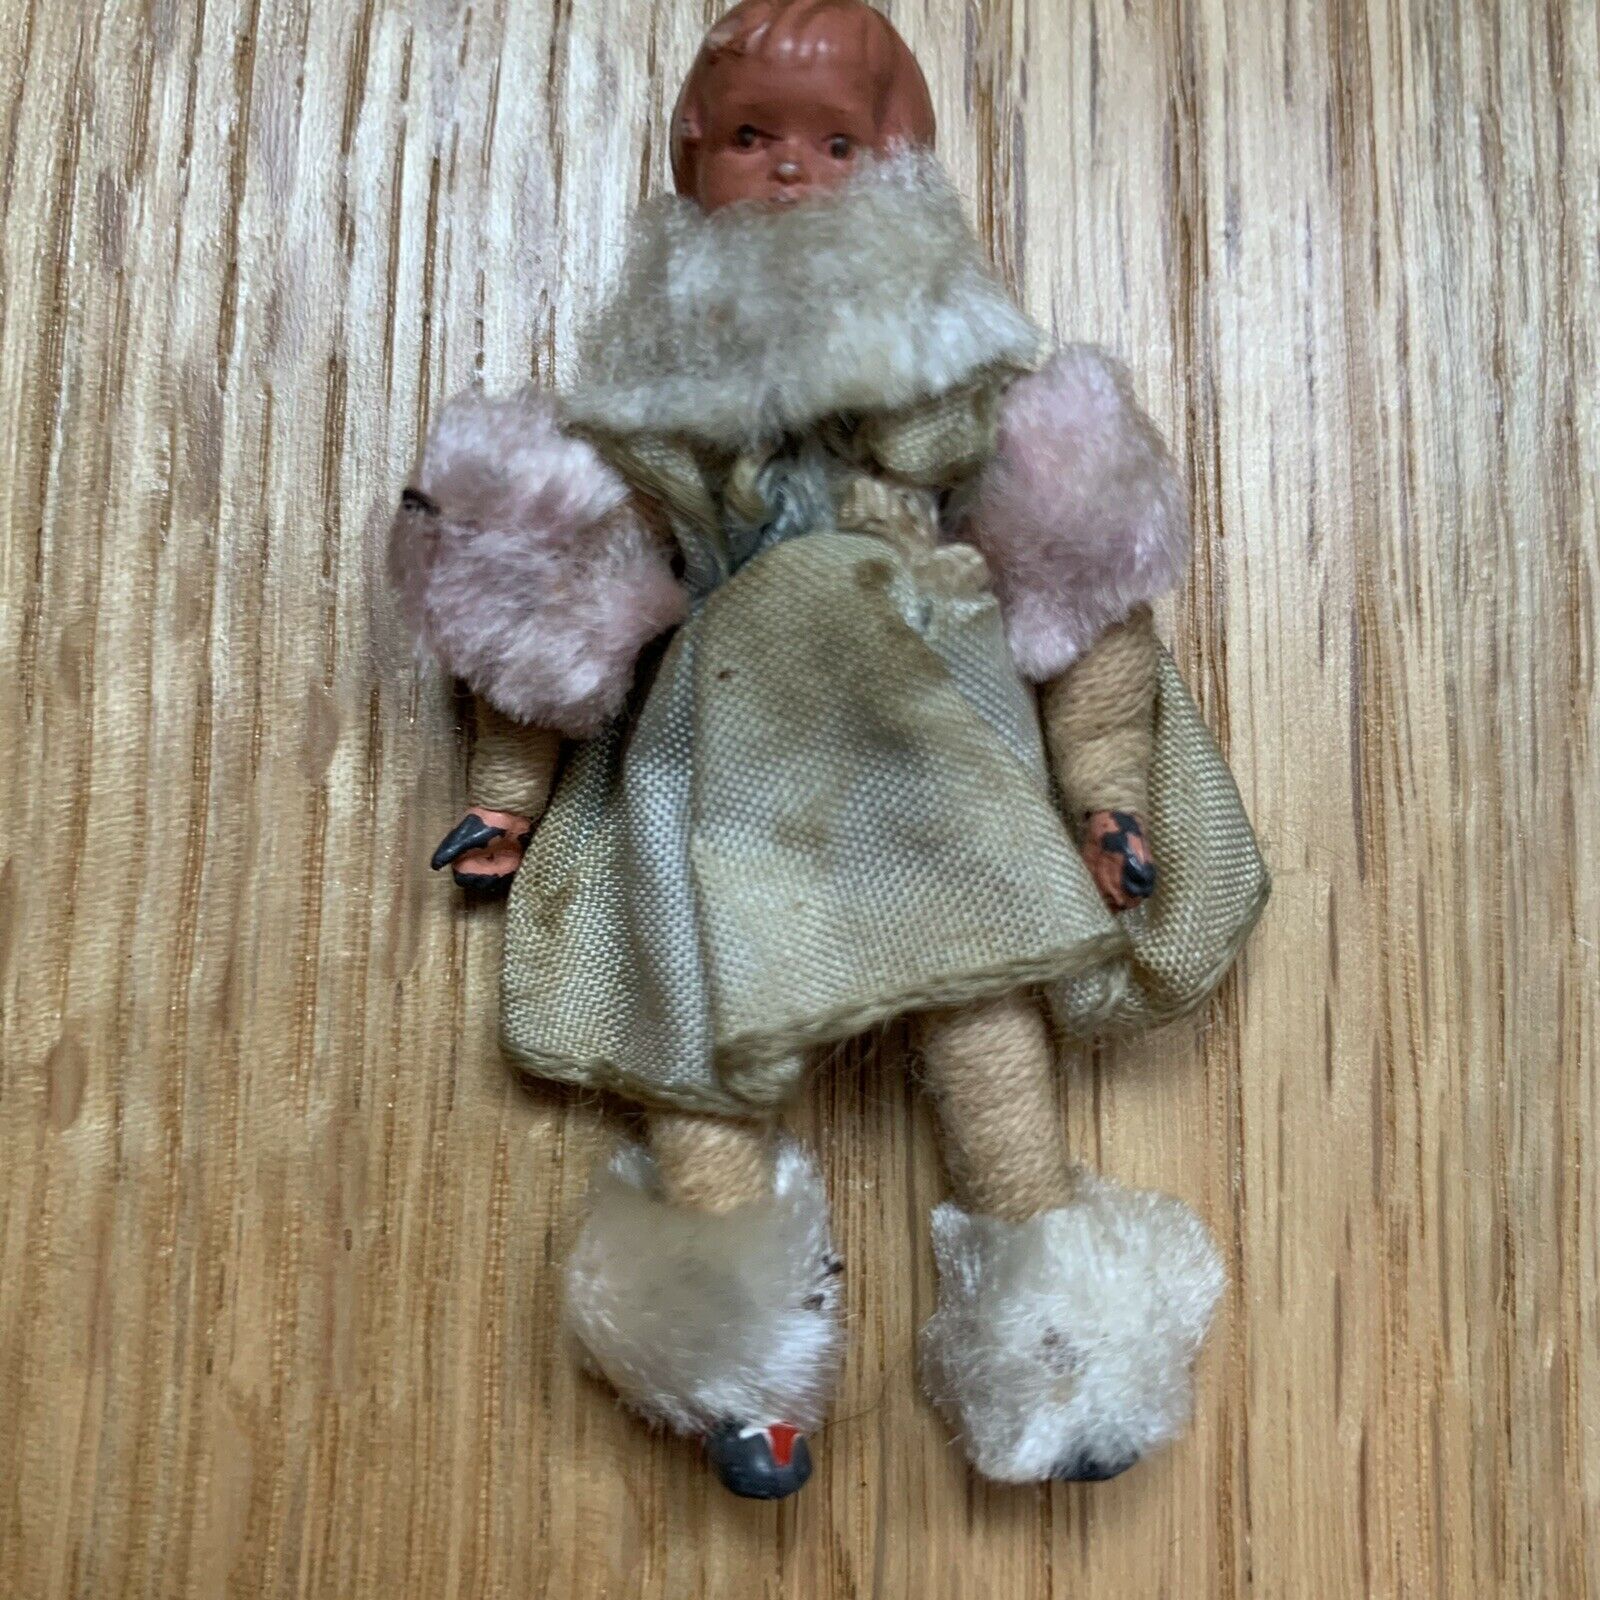 Dressed Little Girl Caco Style Doll Flexible and similar items